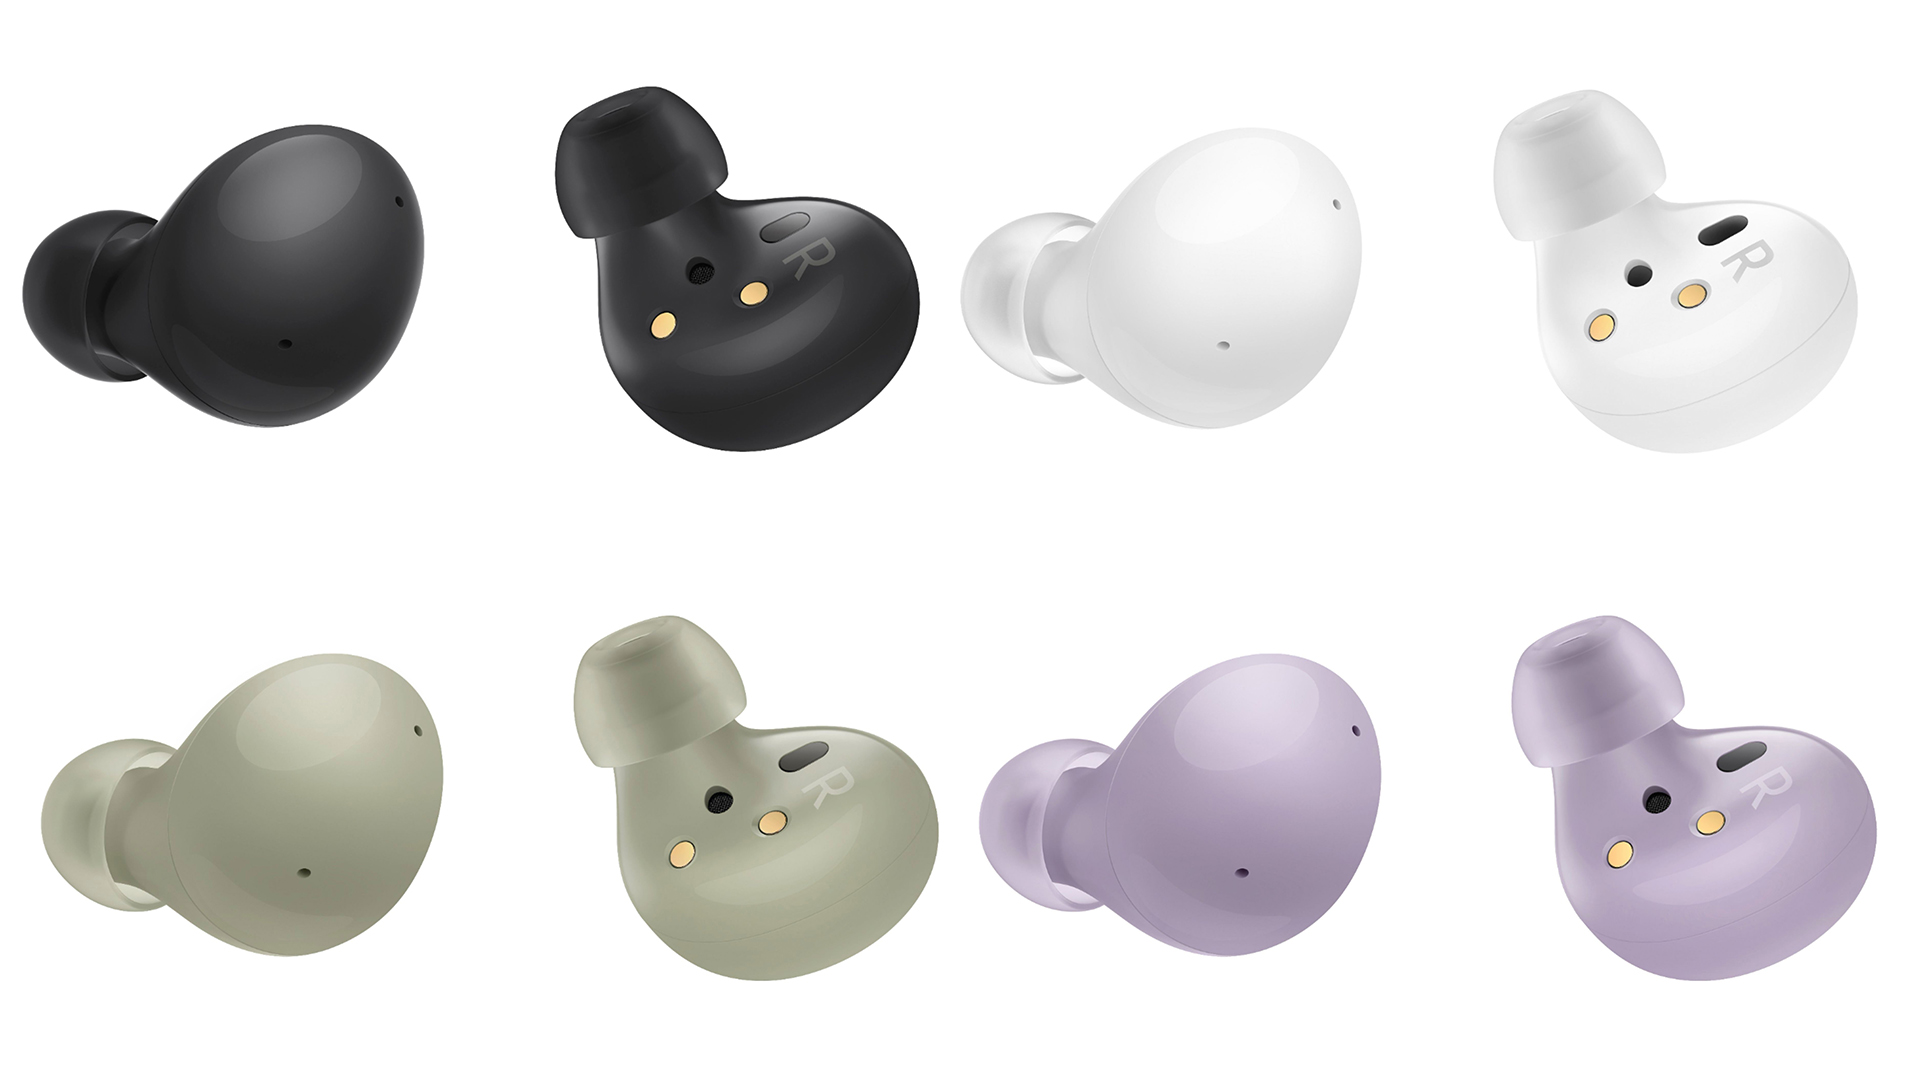 Samsung Galaxy Buds 2 renders show off colors and designs from all angles